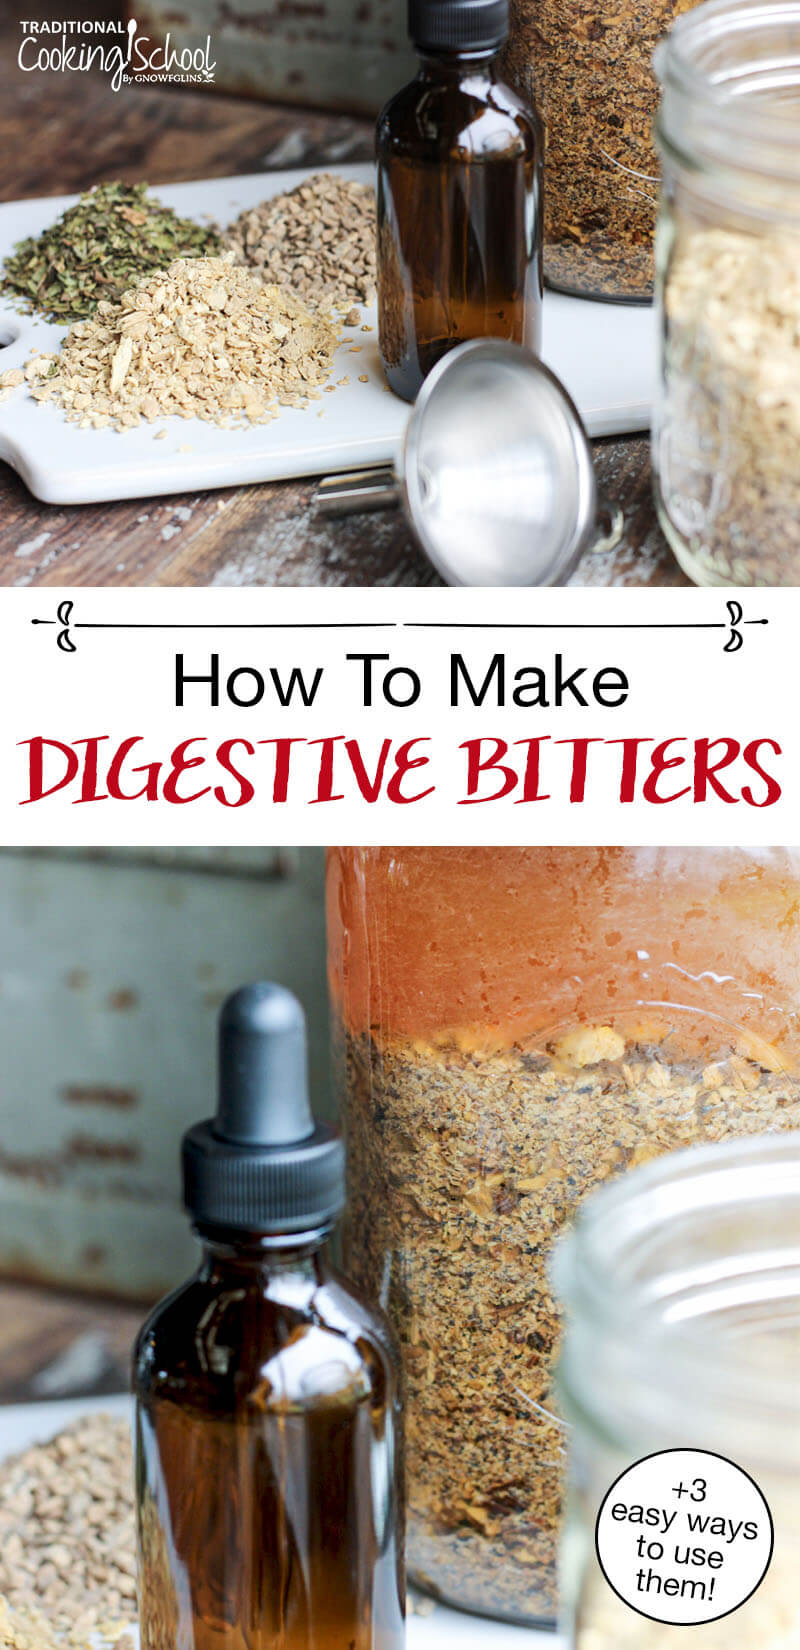 photo collage of making an herbal tincture, including bitter roots, an amber glass dropper bottle, and small stainless steel funnel, with text overlay: "How To Make Digestive Bitters +3 easy ways to use them!"